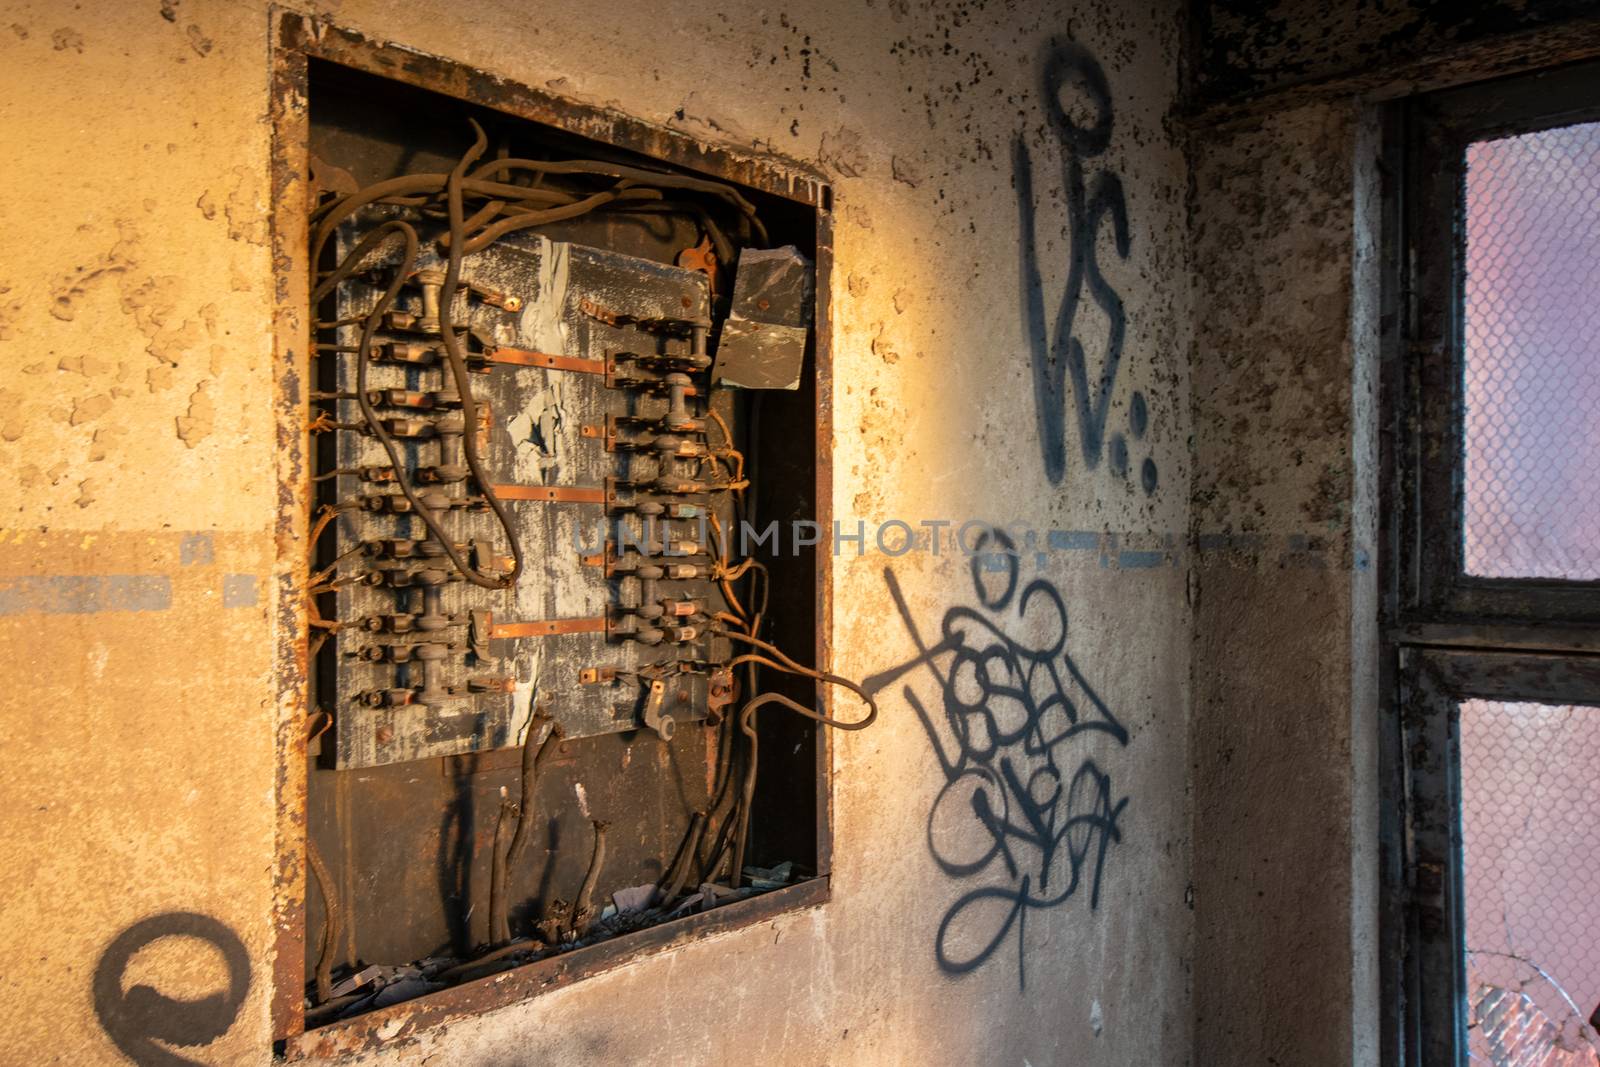 An Old Electrical Panel in an Abandoned Building by bju12290